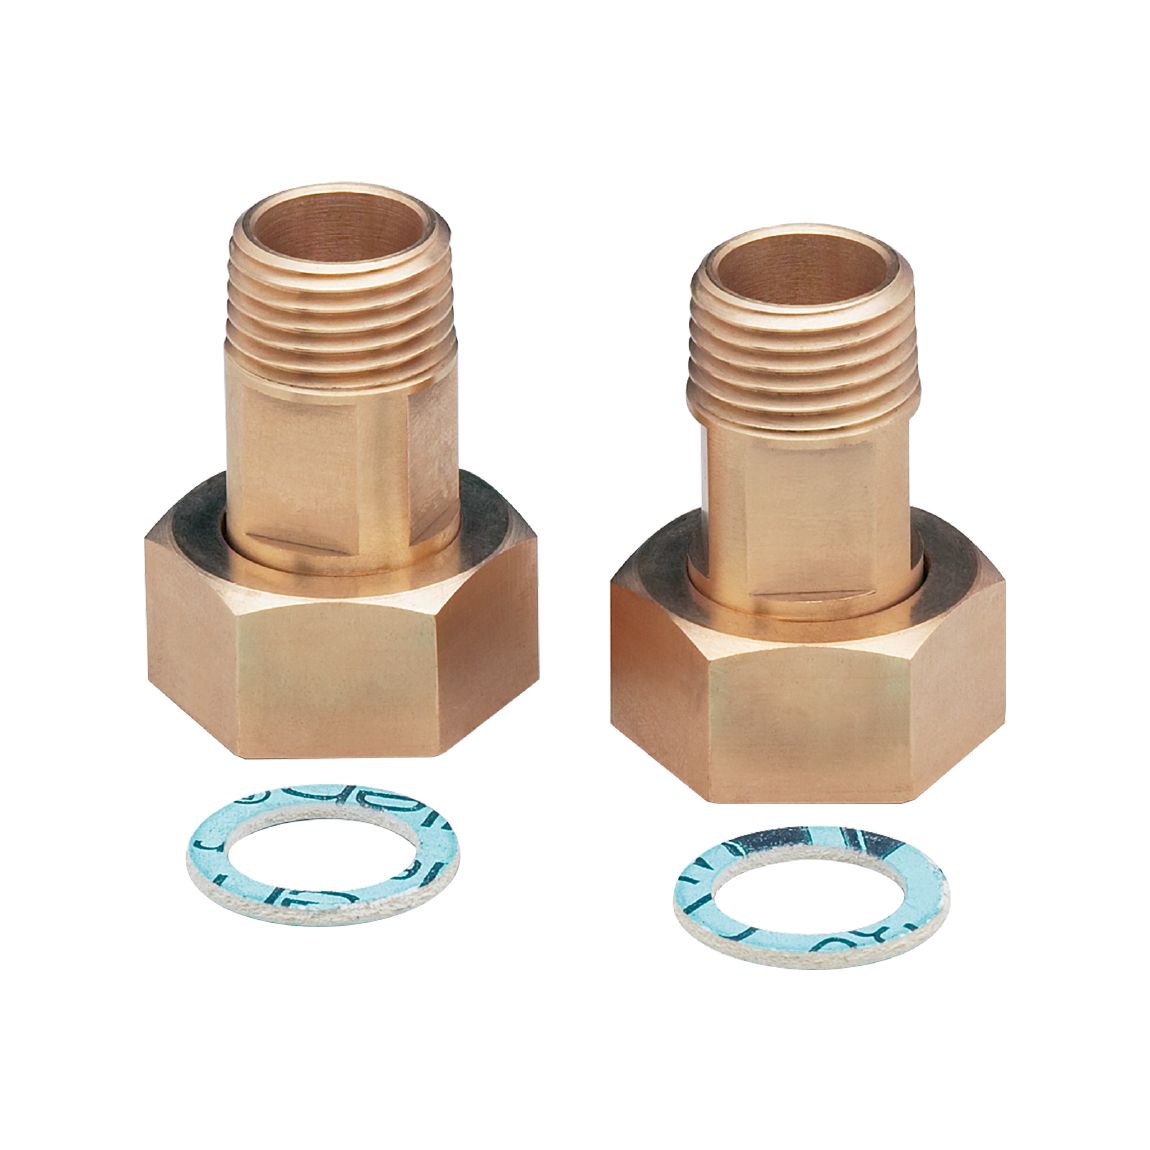 E40154 - Mounting adapter for flow sensors - ifm